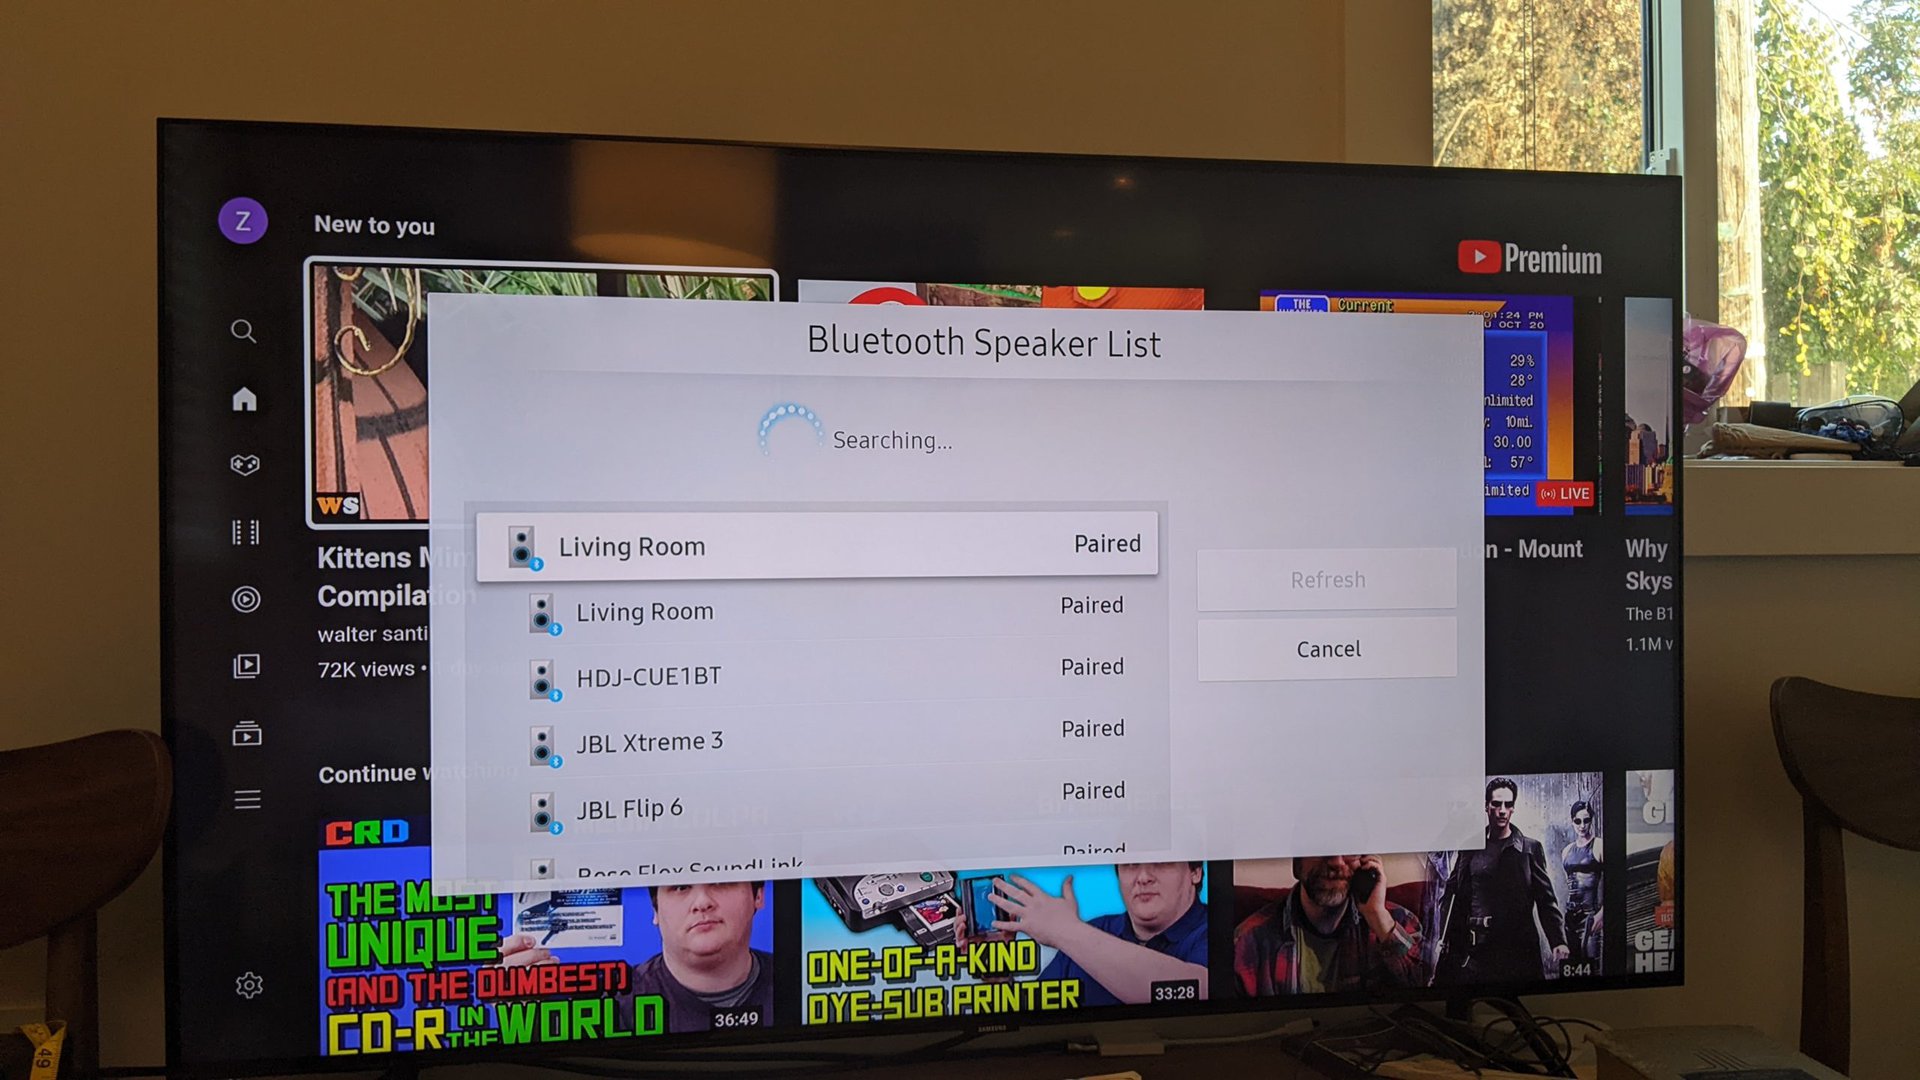 A photograph of a Samsung TV showing the Bluetooth speaker list.